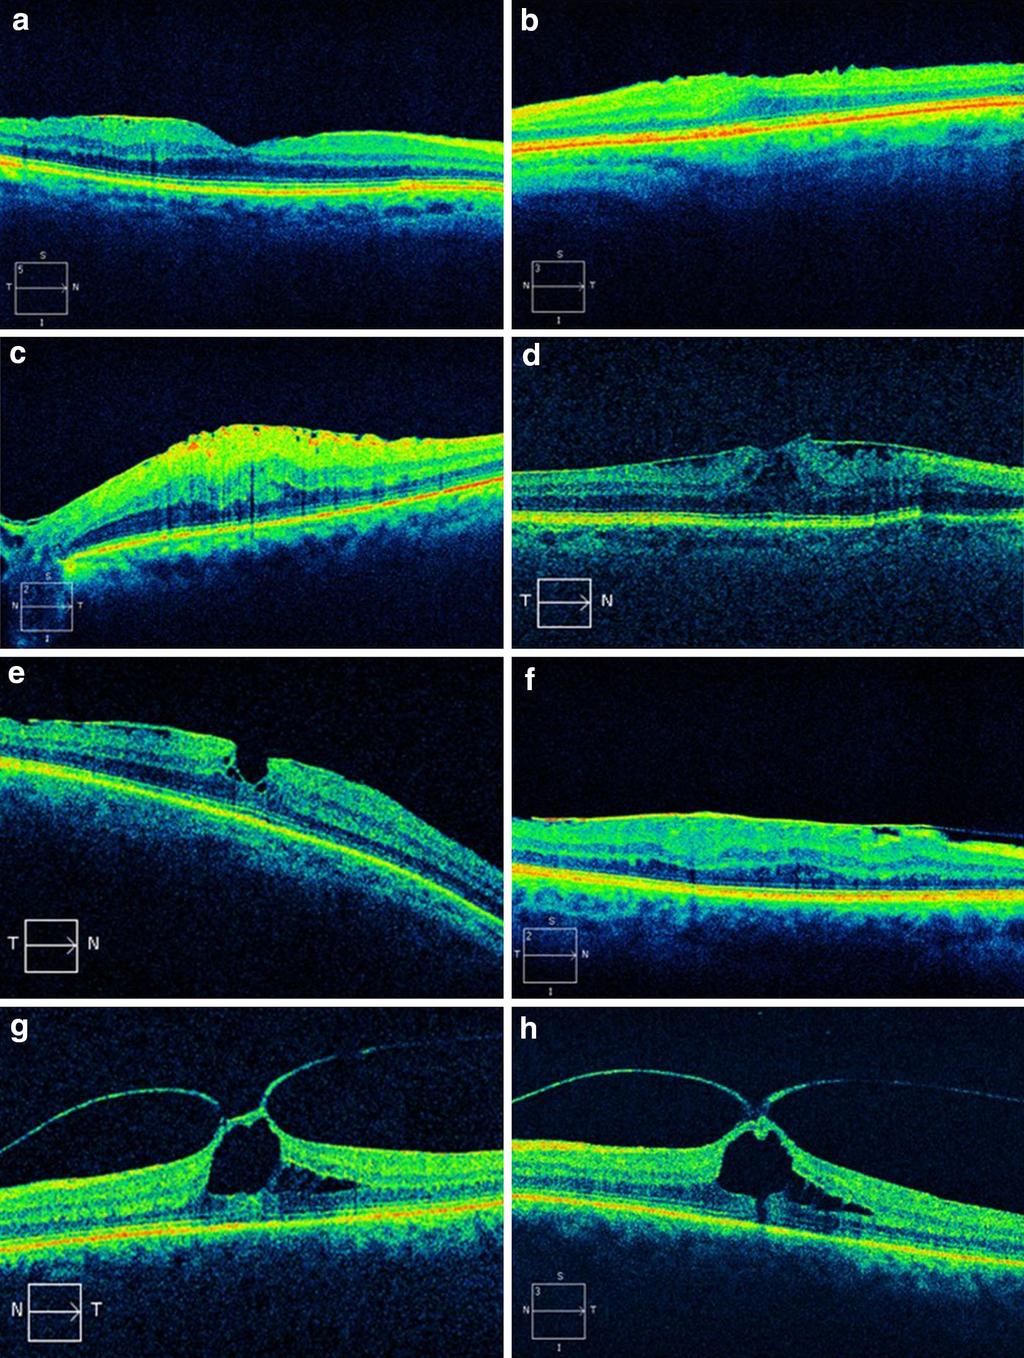 Fig. 2 Epiretinal membranes with posterior vitreous detachment without contraction (a), with folding (b), with edema (c), with cystoid macular edema (d), and